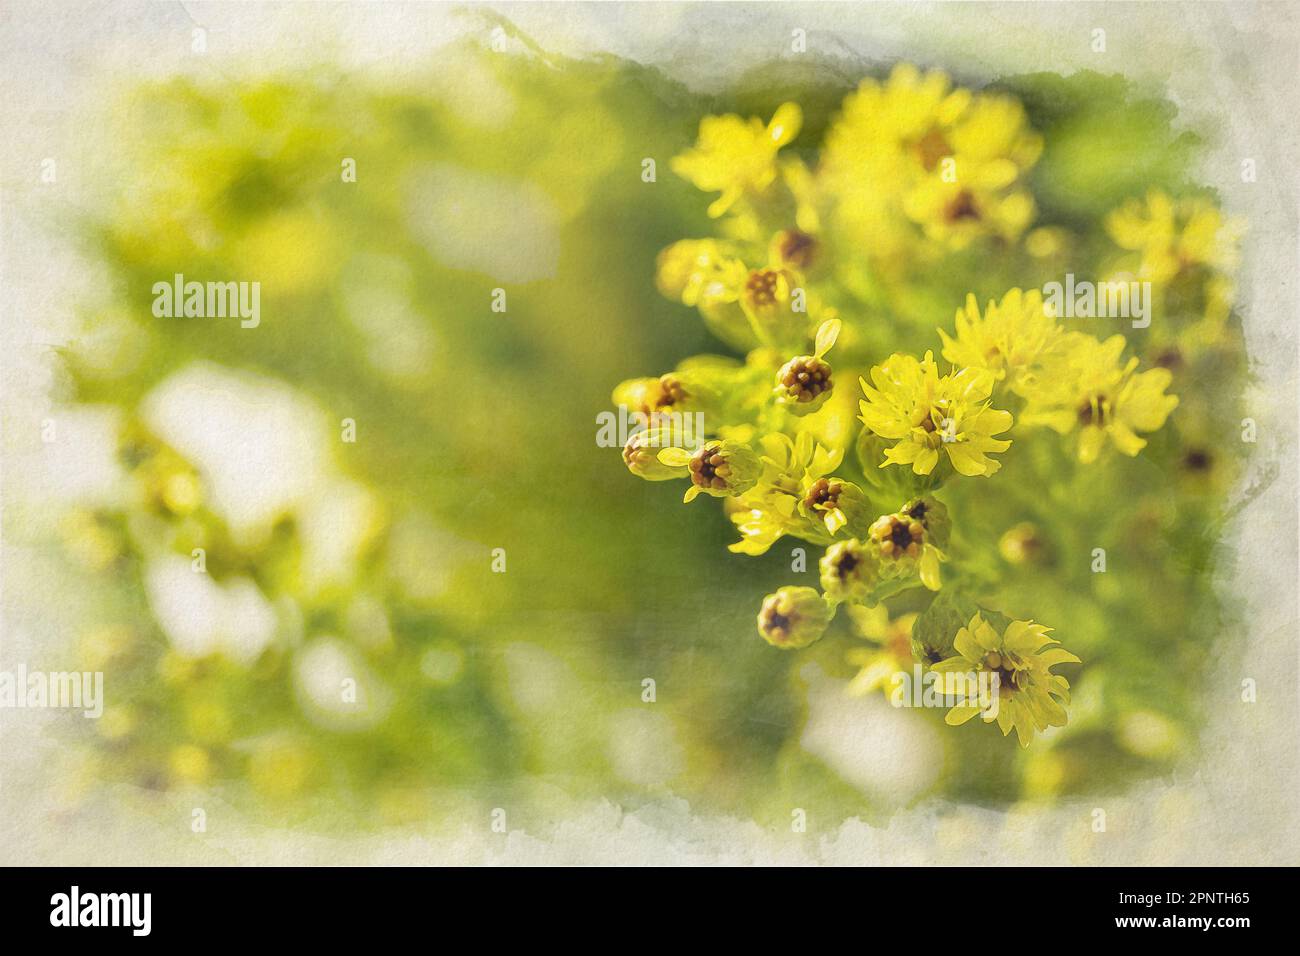 A digital watercolour painting of a sprig of spurge in a natural garden setting with shallow depth of field. Stock Photo